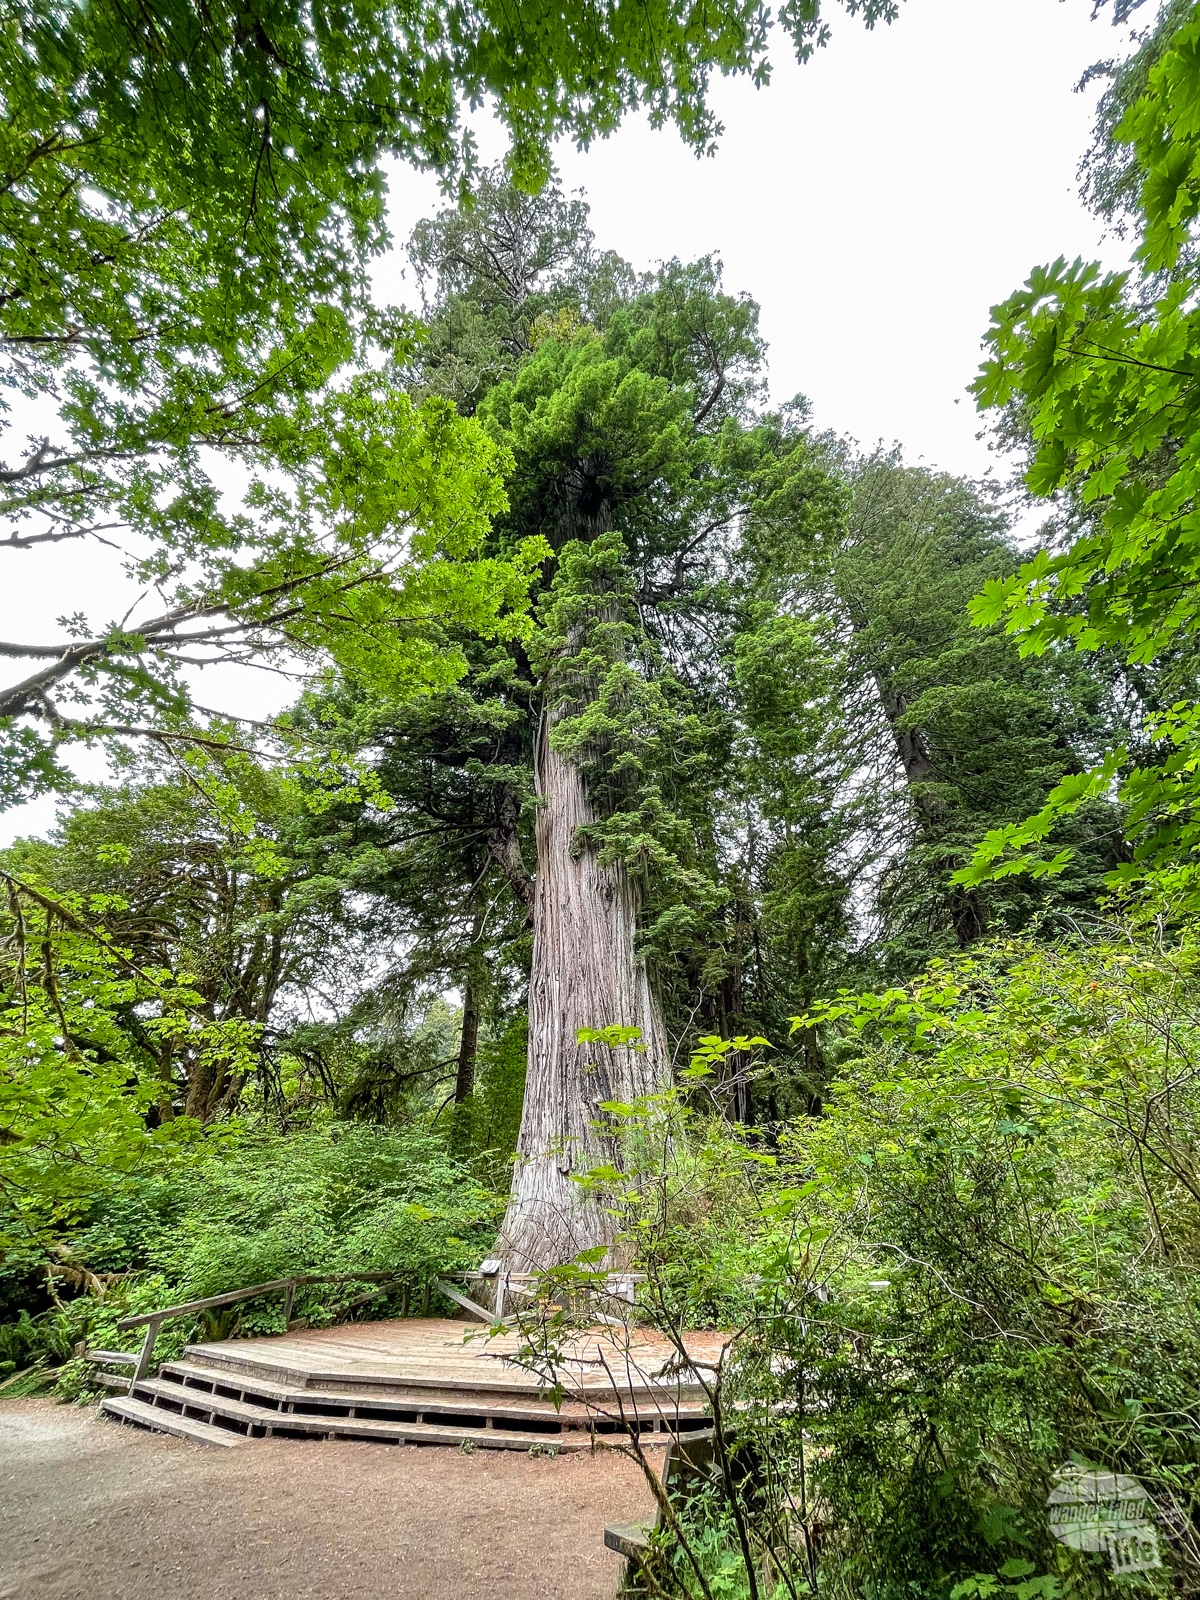 The Big Tree is a must-see when visiting Redwood National Park